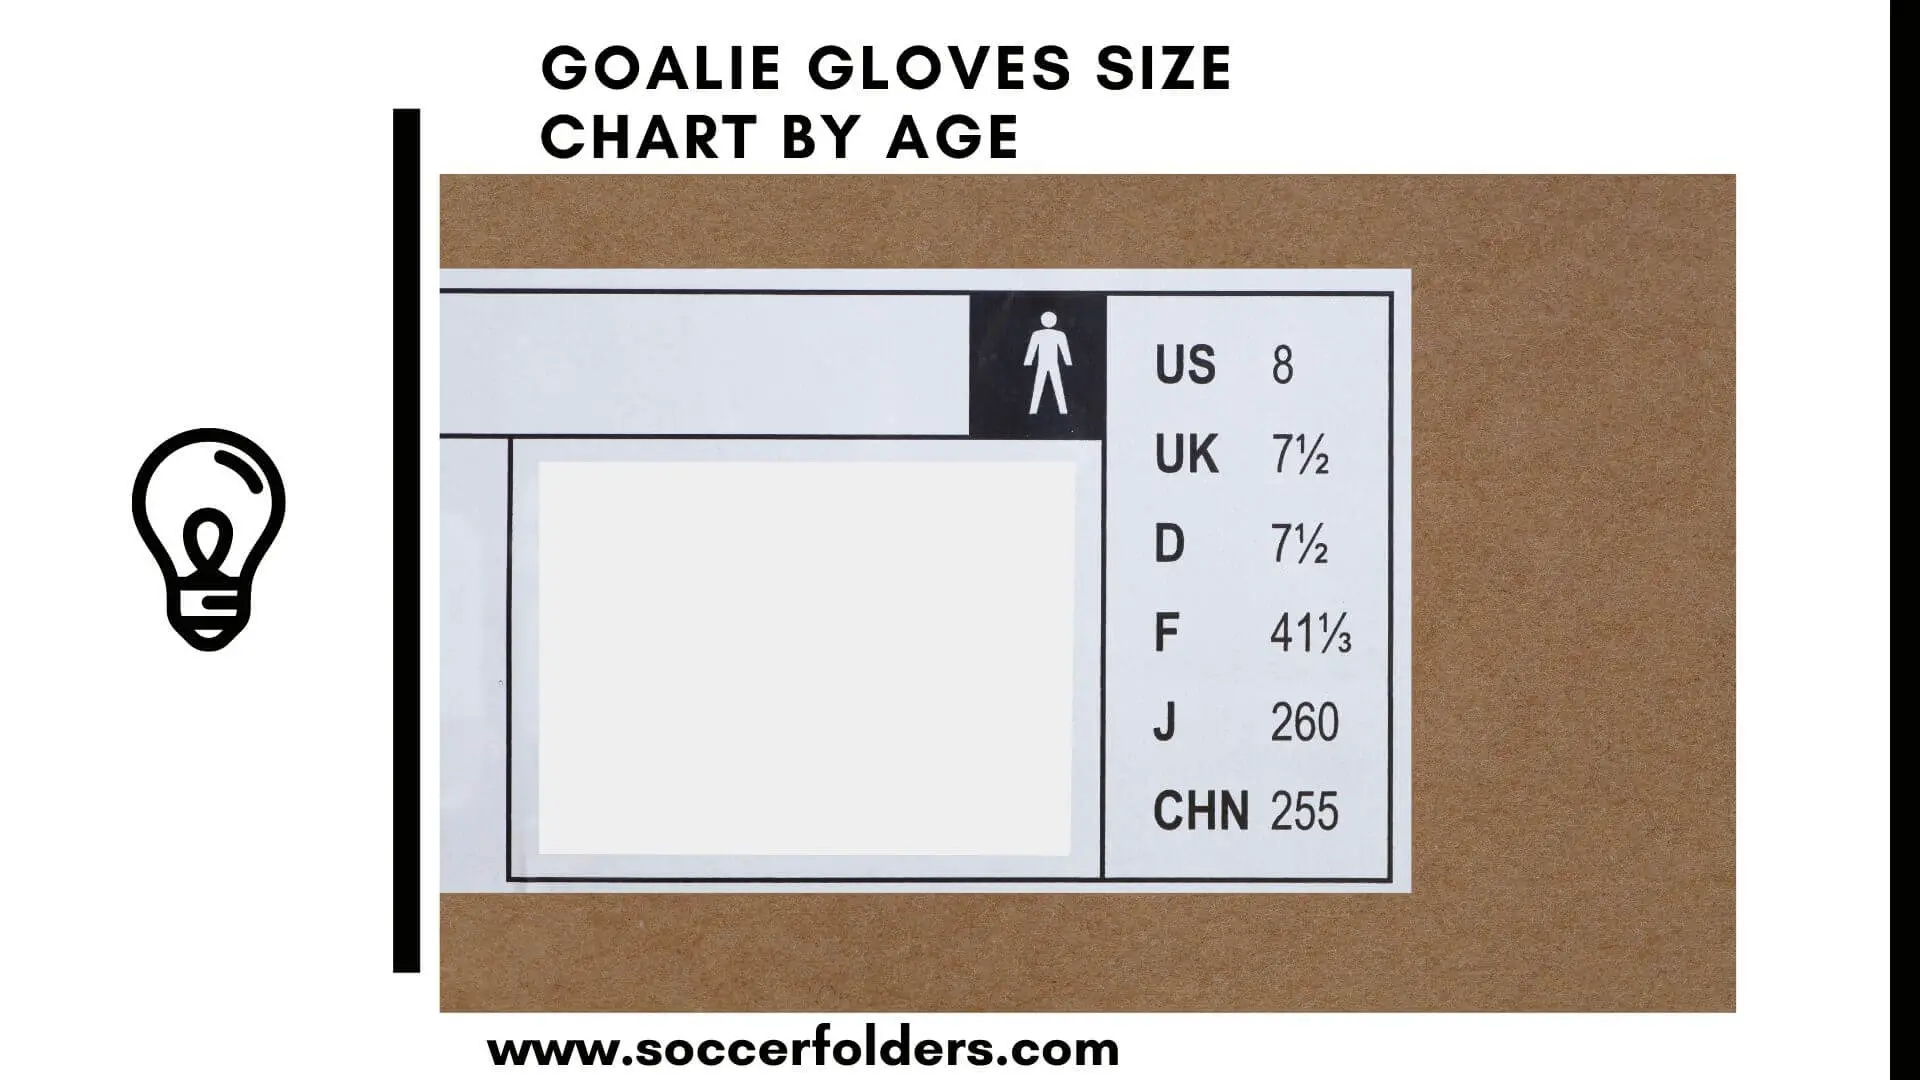 Goalie Gloves Size Chart By Age - Featured image